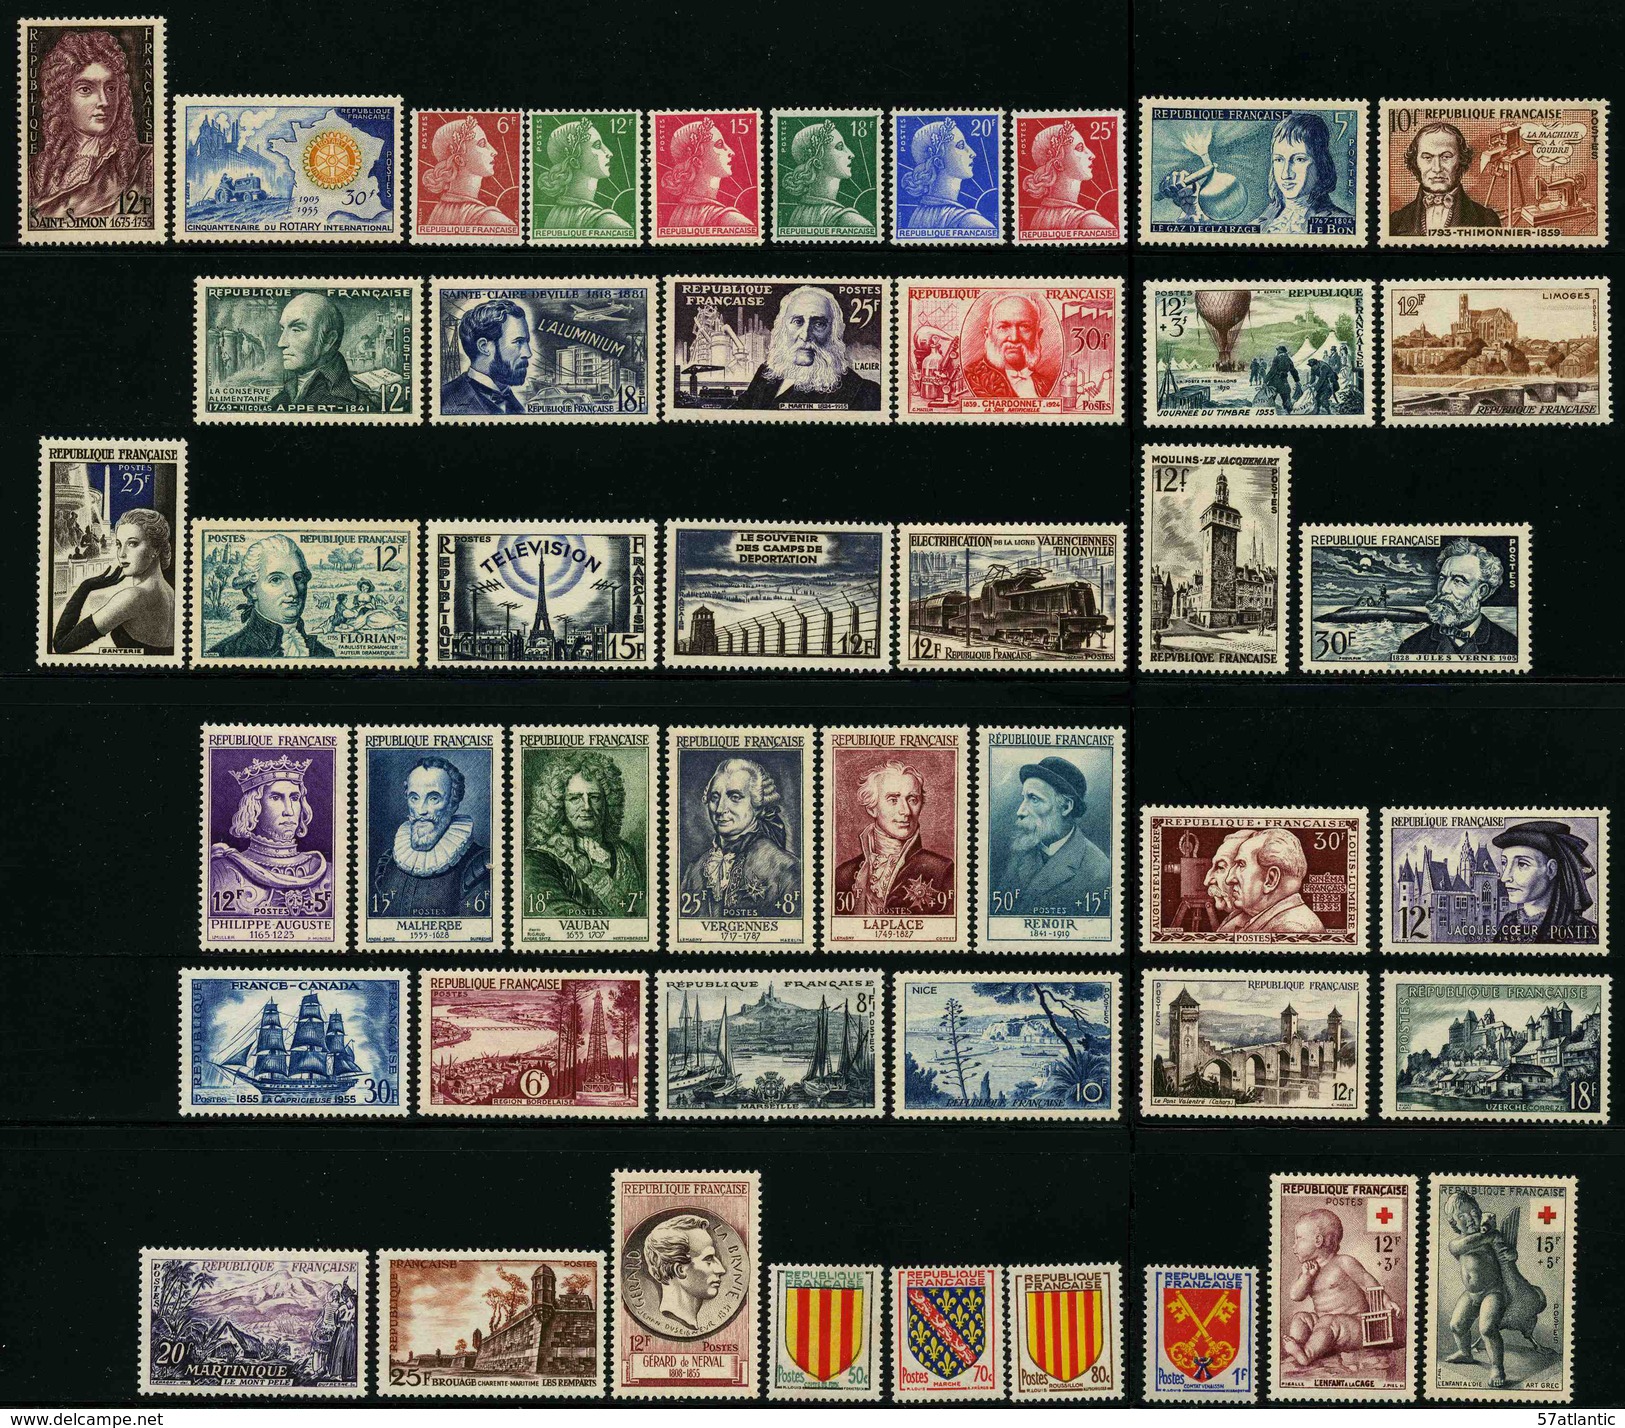 FRANCE - ANNEE COMPLETE 1955 - YT 1008 à 1049 ** - 46 TIMBRES NEUFS ** - 1950-1959